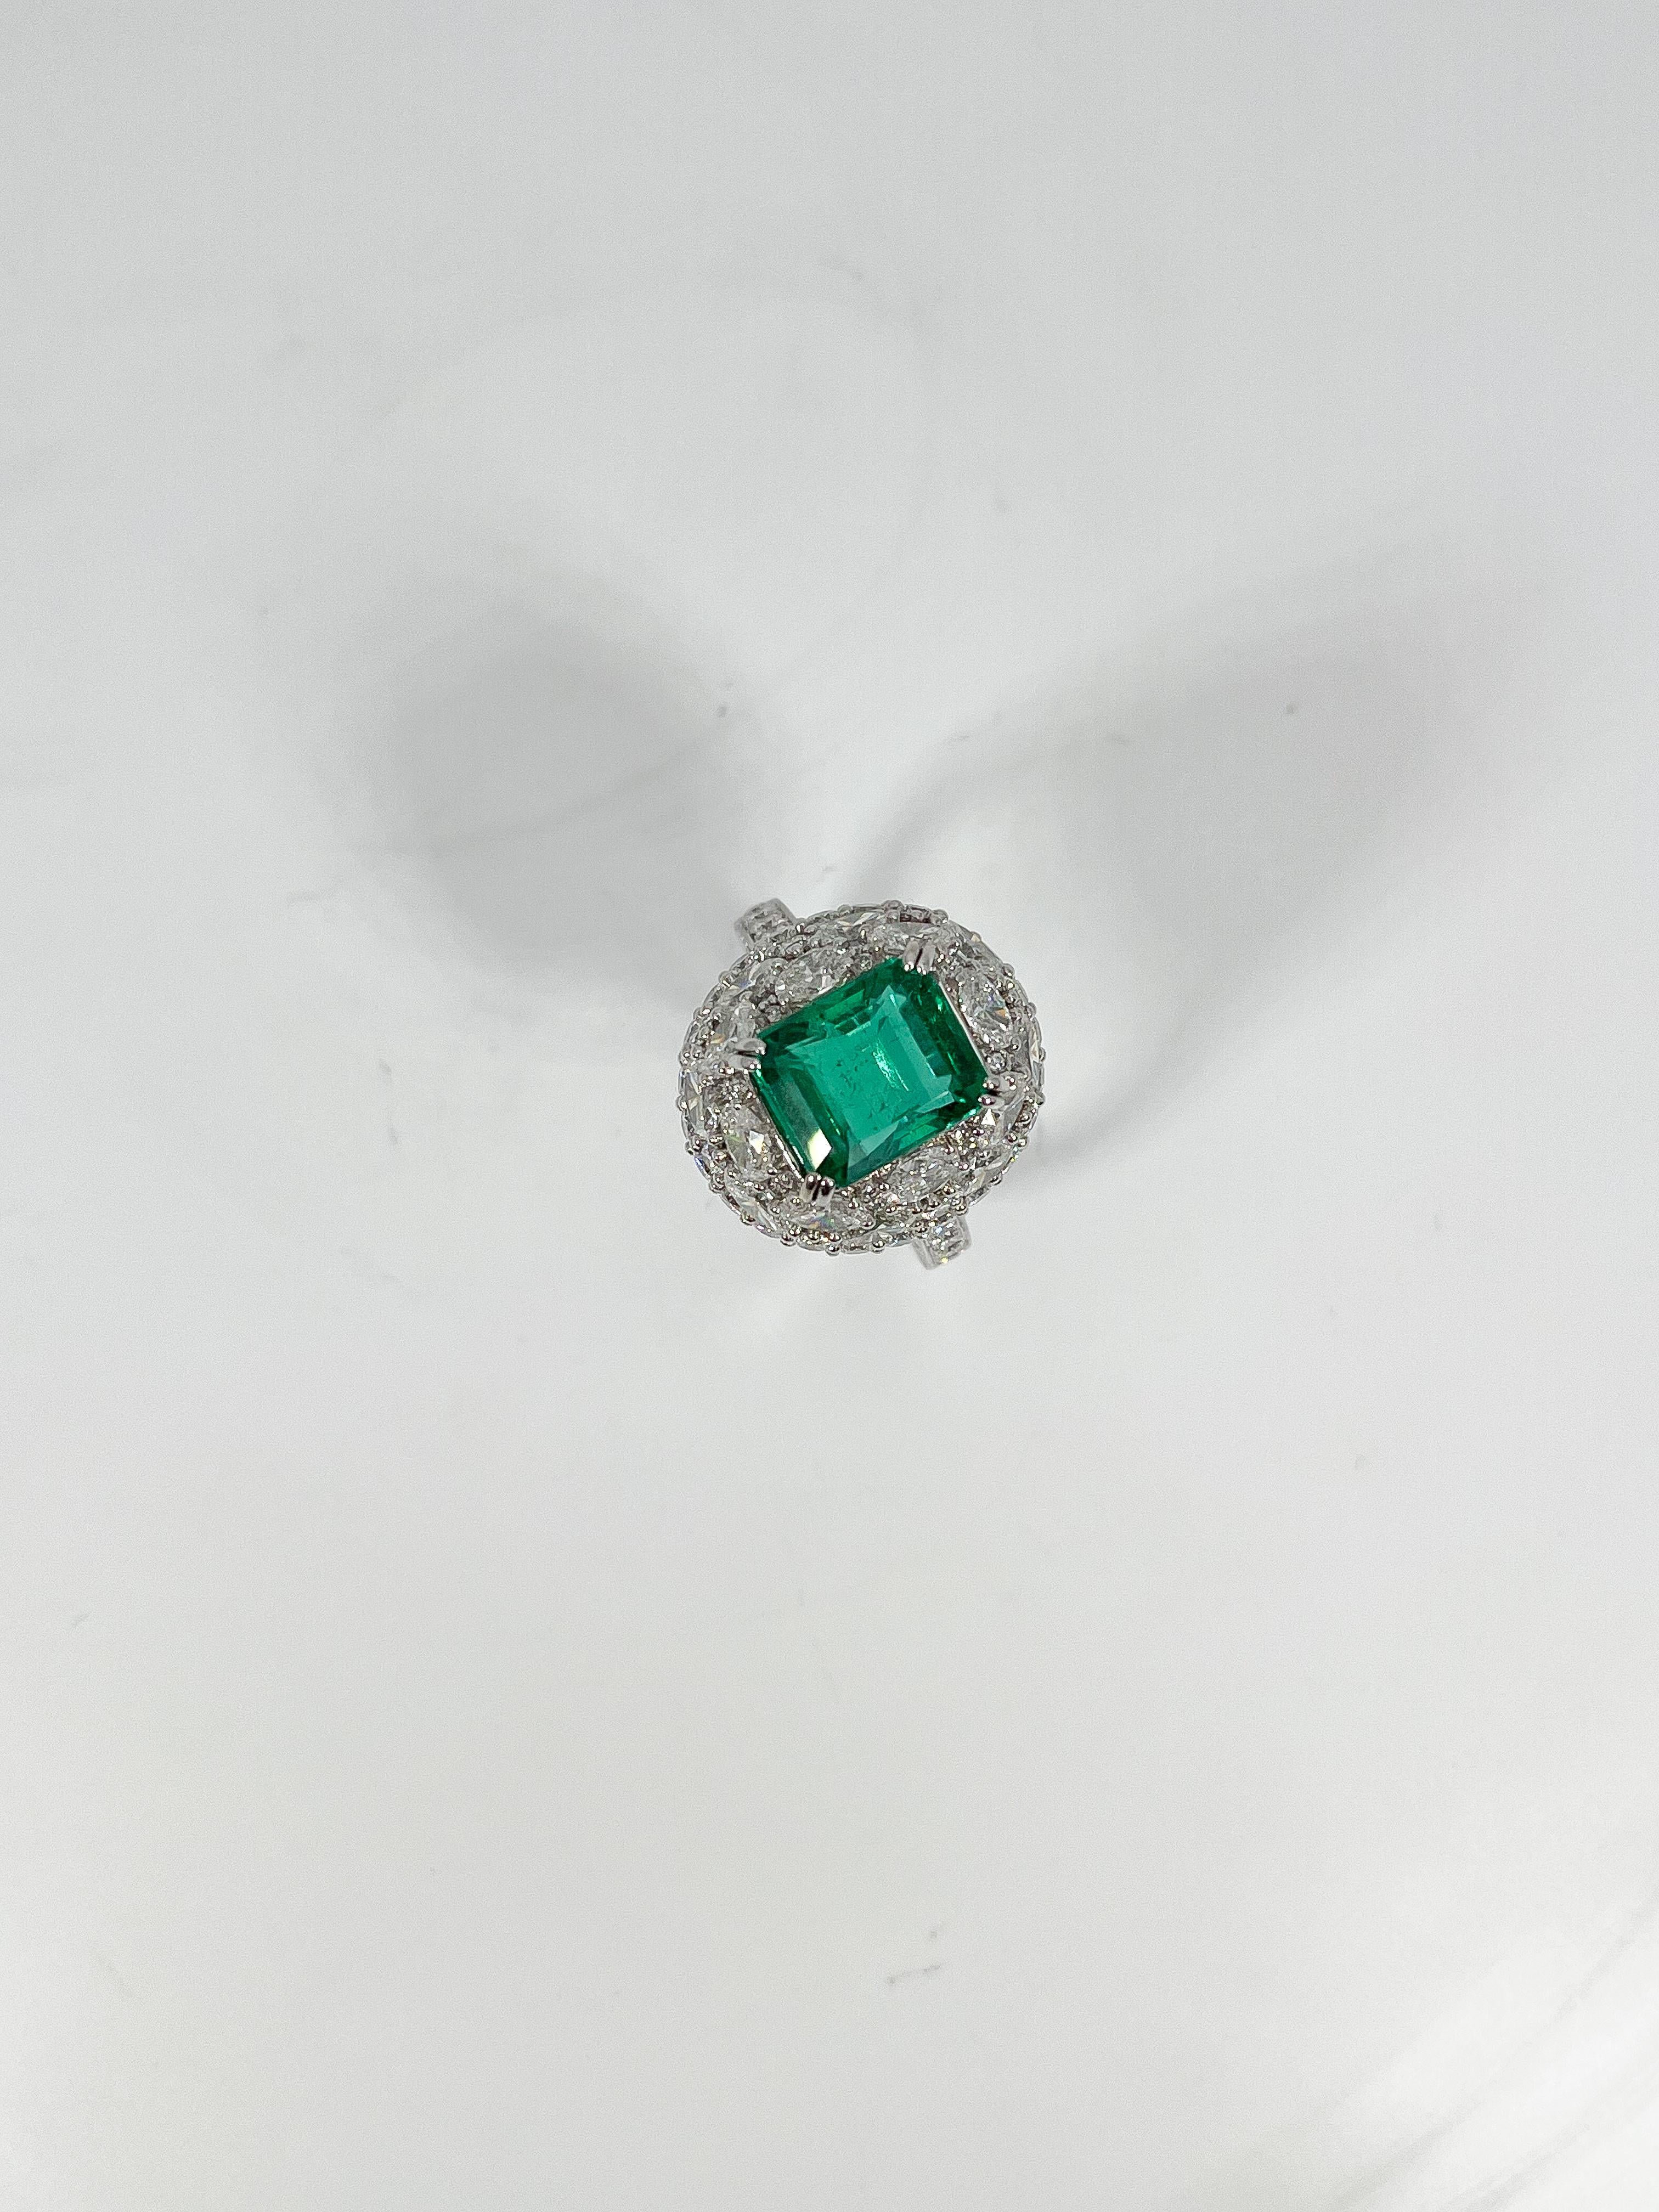 Ladies 18k white gold size 7 1/2 ring prong set with an octagon step cut emerald and oval and round brilliant cut diamonds. Total item weight is 10.8 grams. Comes with AJI certification. 
Emerald Attributes: 
Shape and Cut- Octagon step